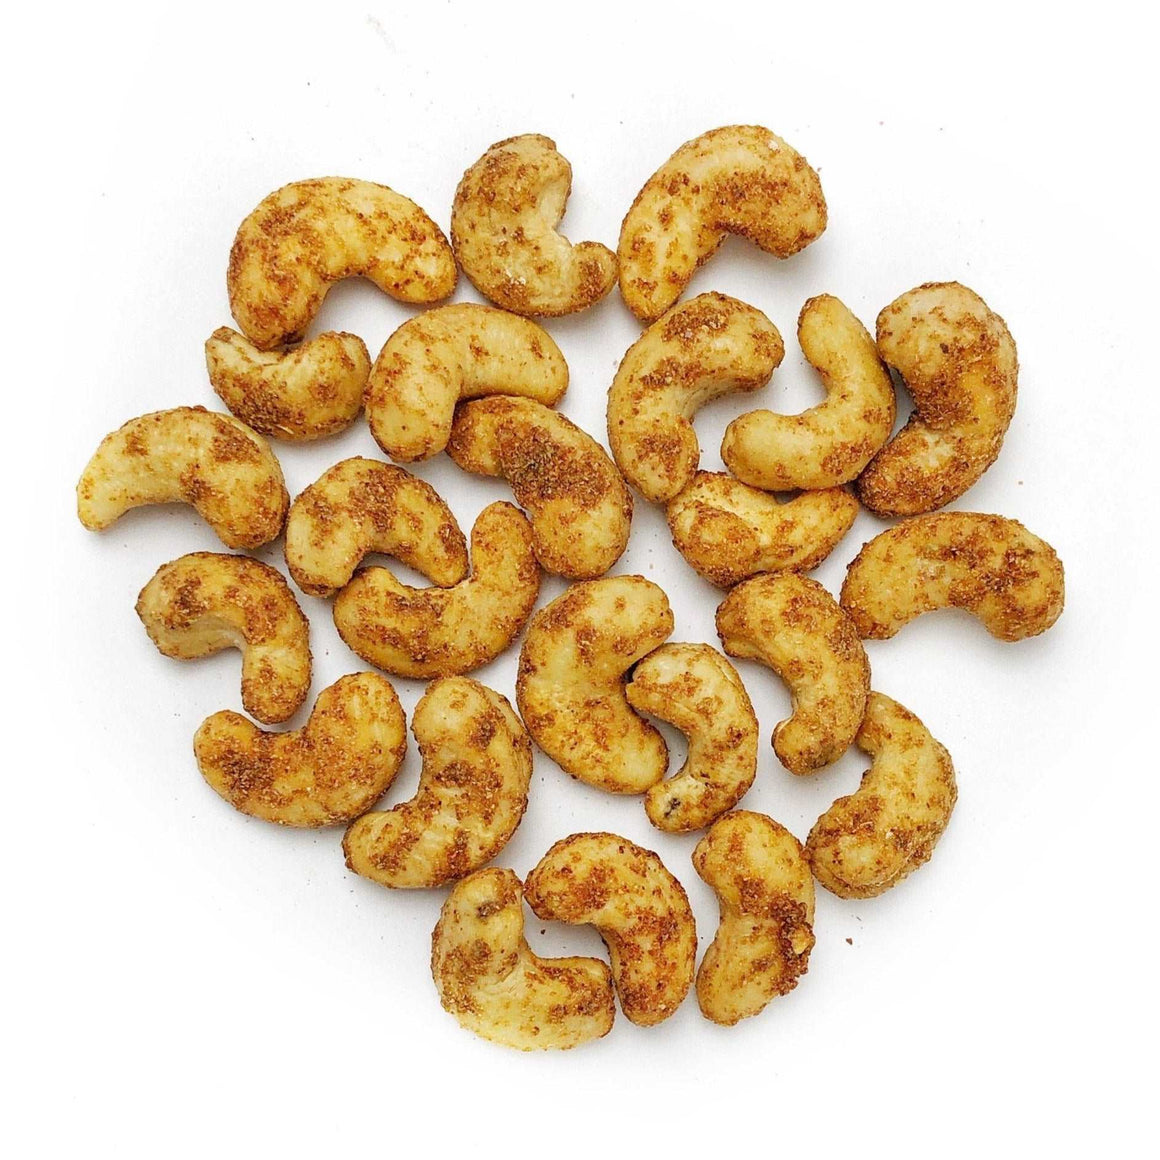 Roasted Pizza Flavoured Cashews arranged on a white background.